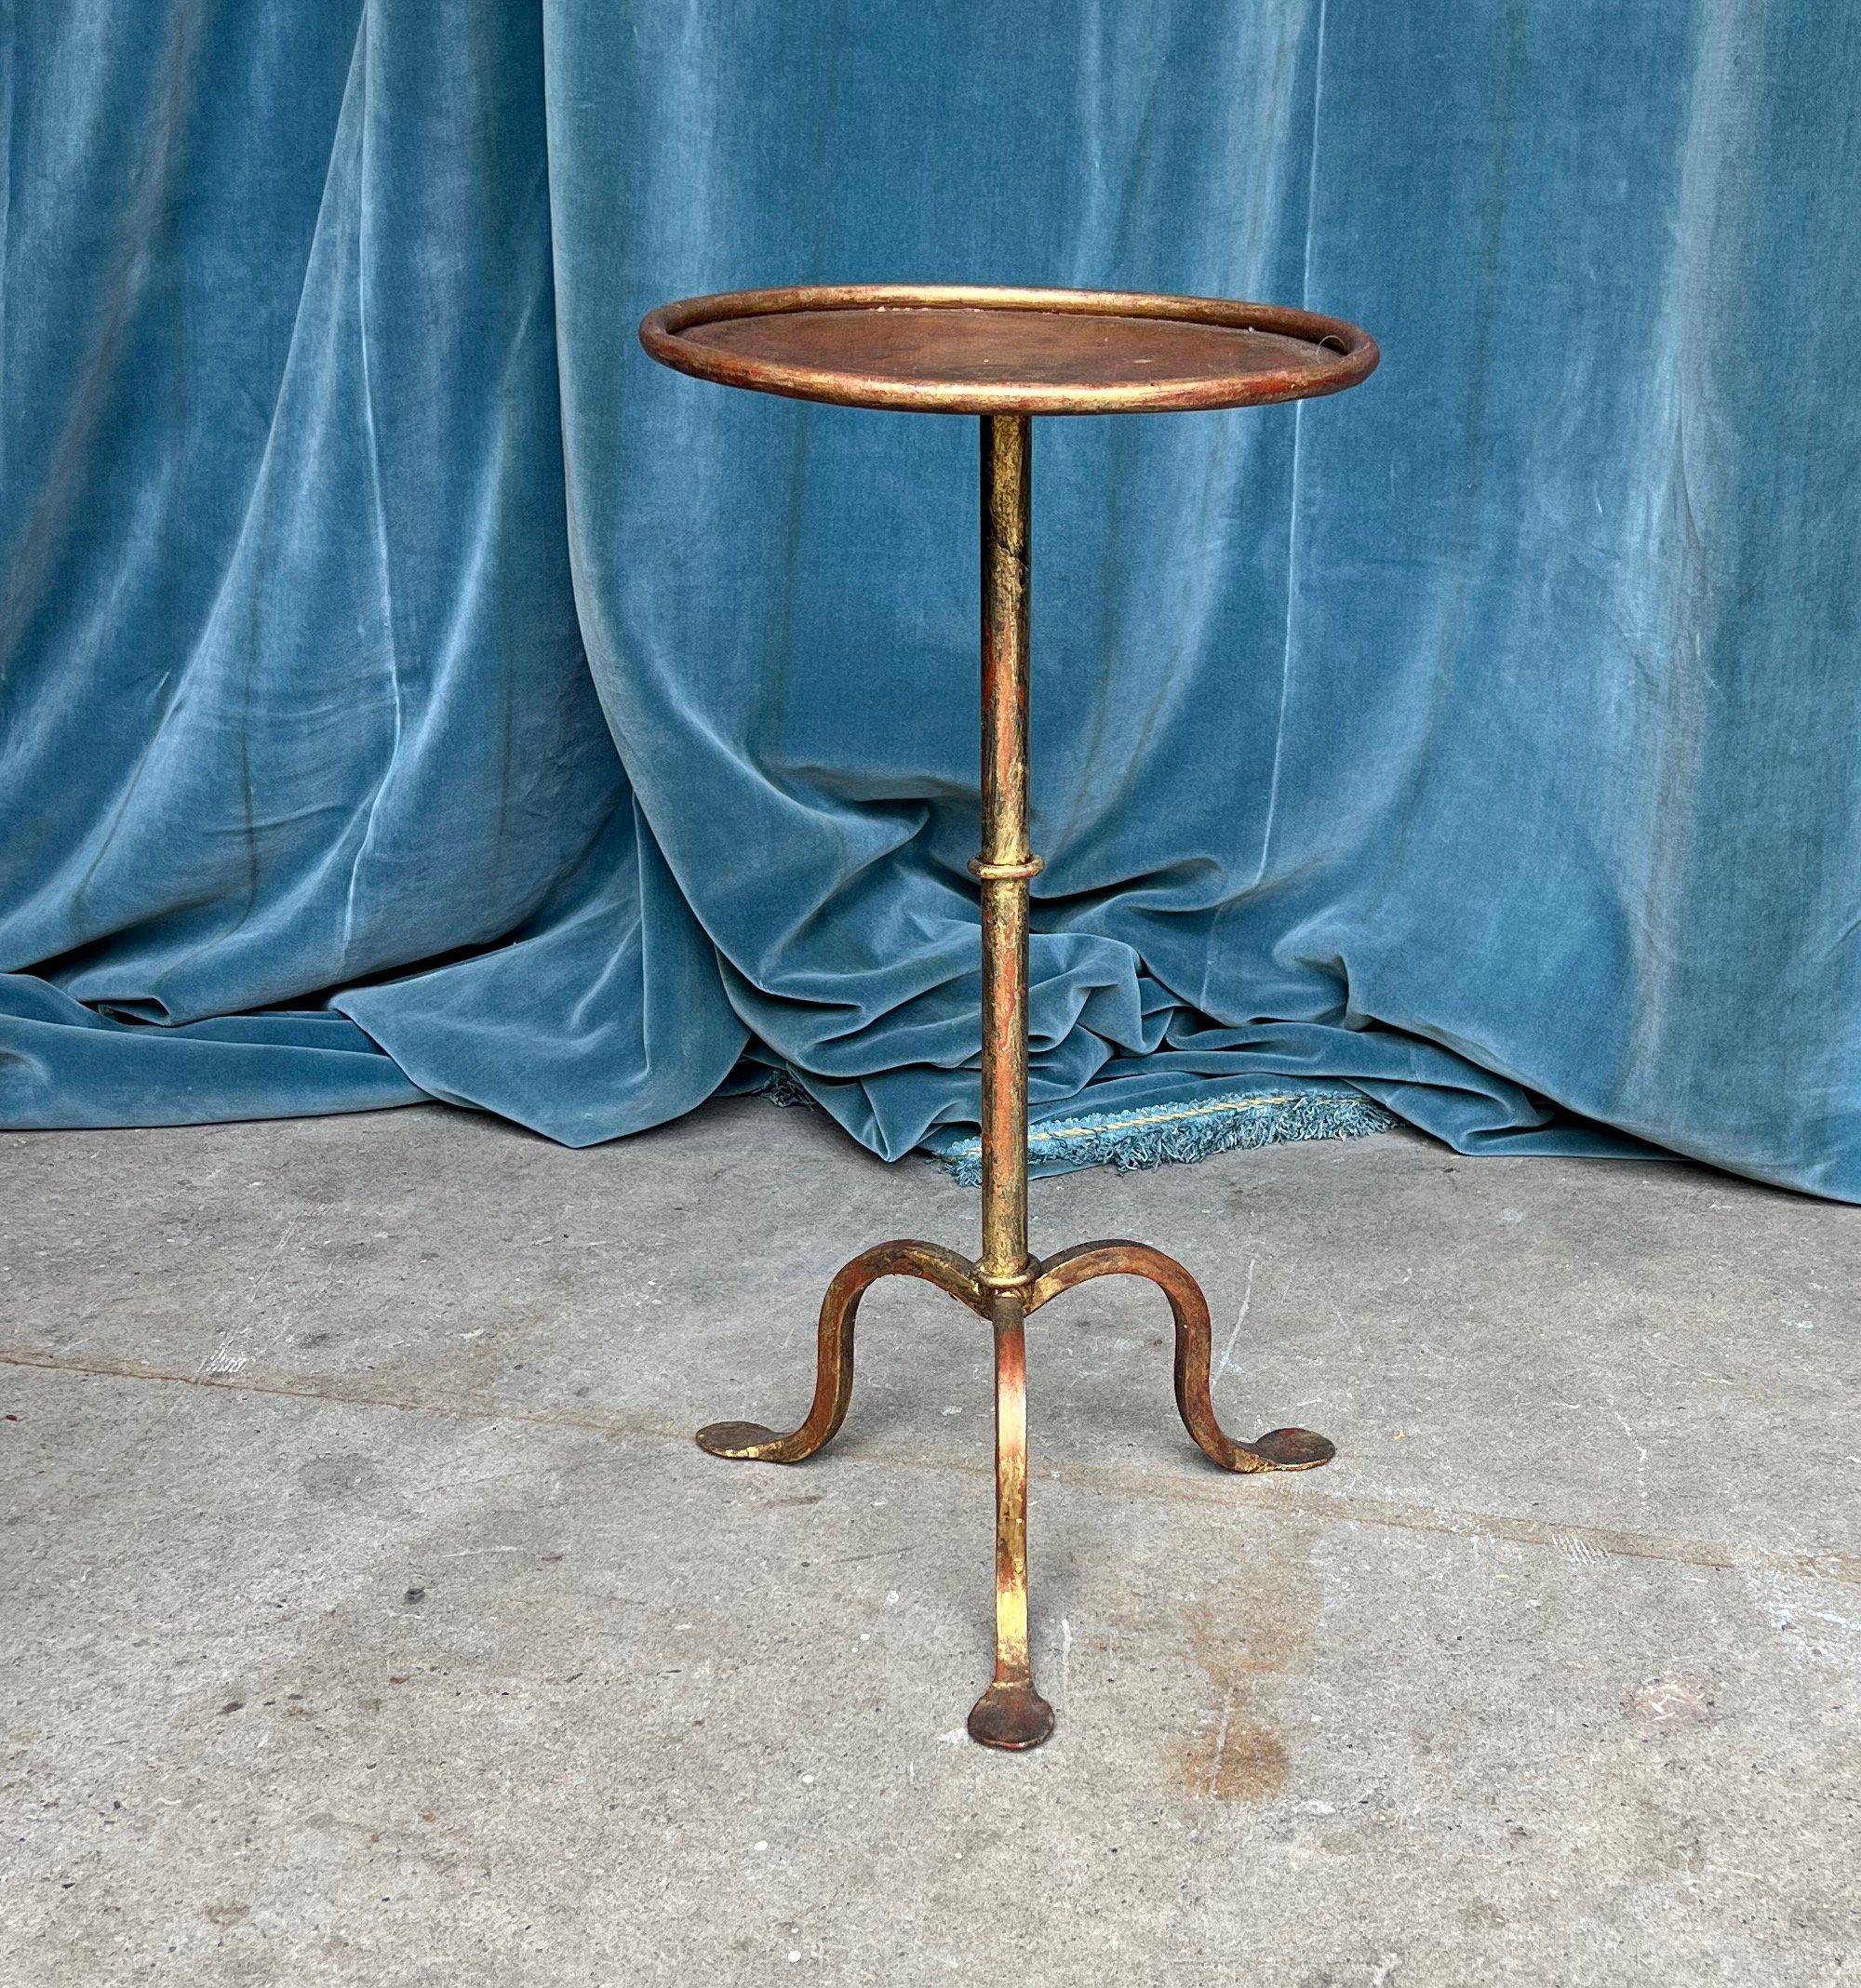 This handsome gilt iron martini table was recently created by accomplished artisans using traditional iron-working methods with an emphasis on superior quality. Giving meticulous attention to detail, it features a beautiful patinated finish that